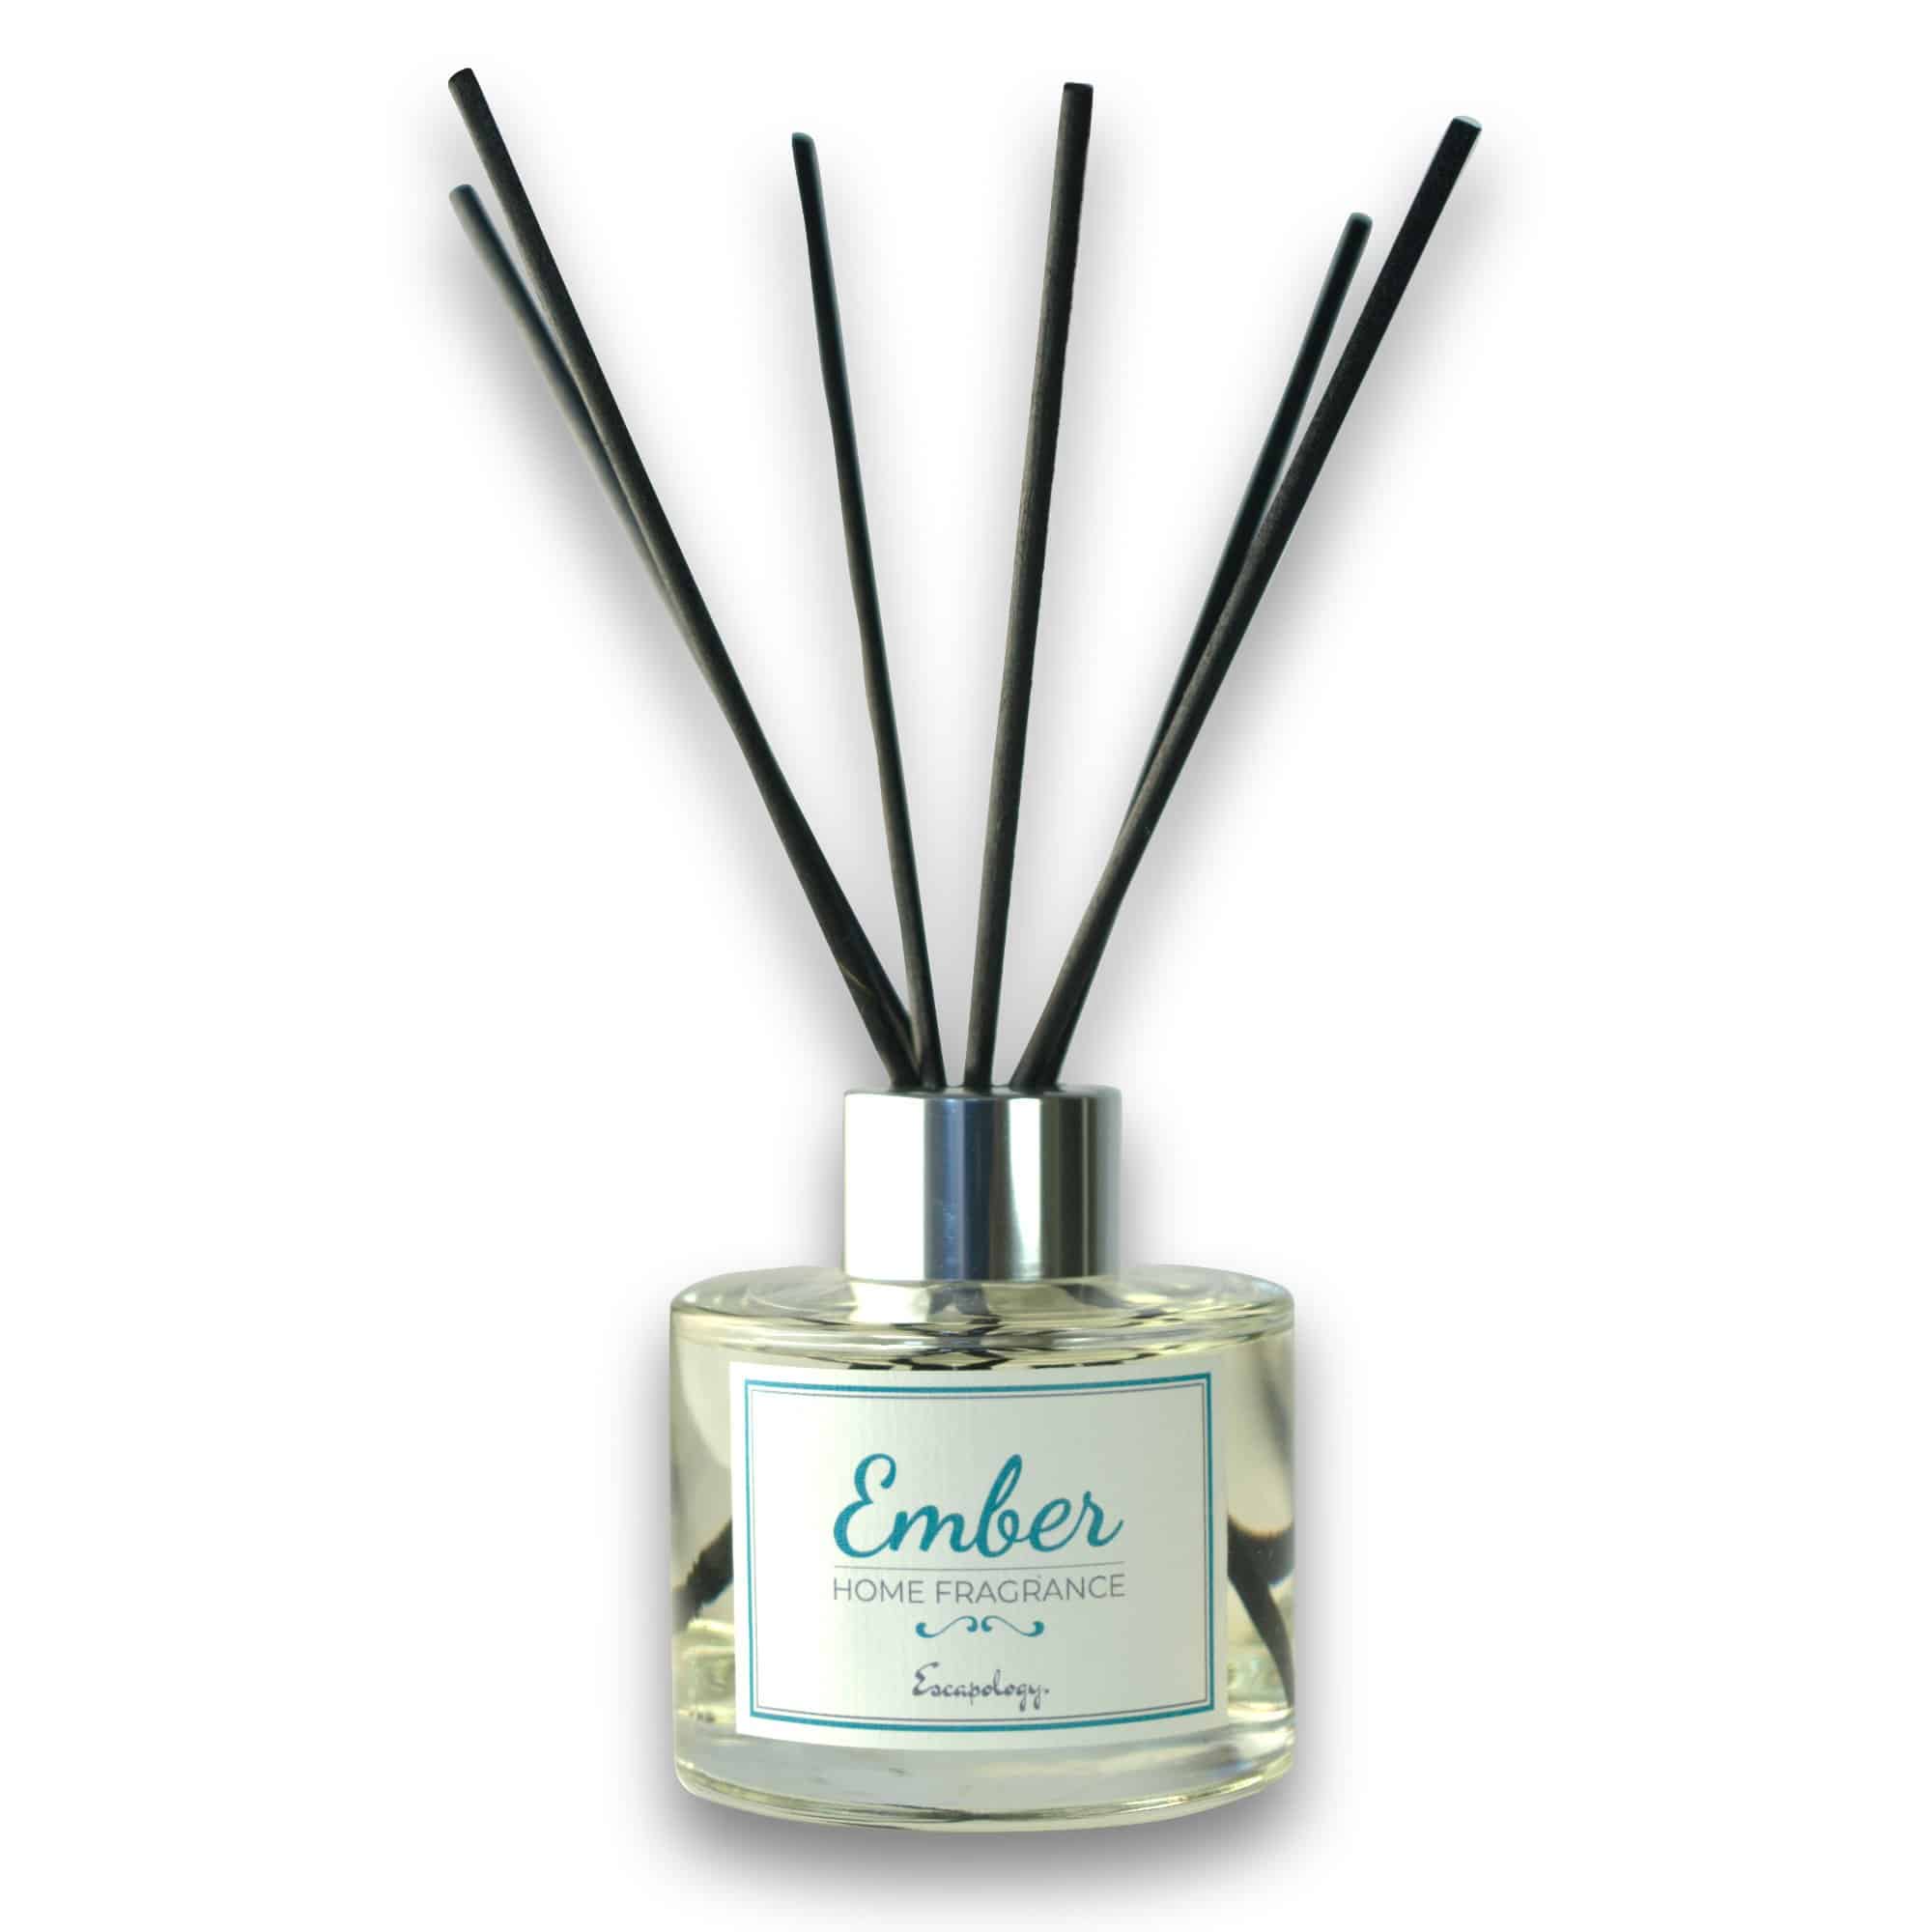 Ember Luxury Home Fragrance Reed Diffuser Set - escapologyhome.co.uk